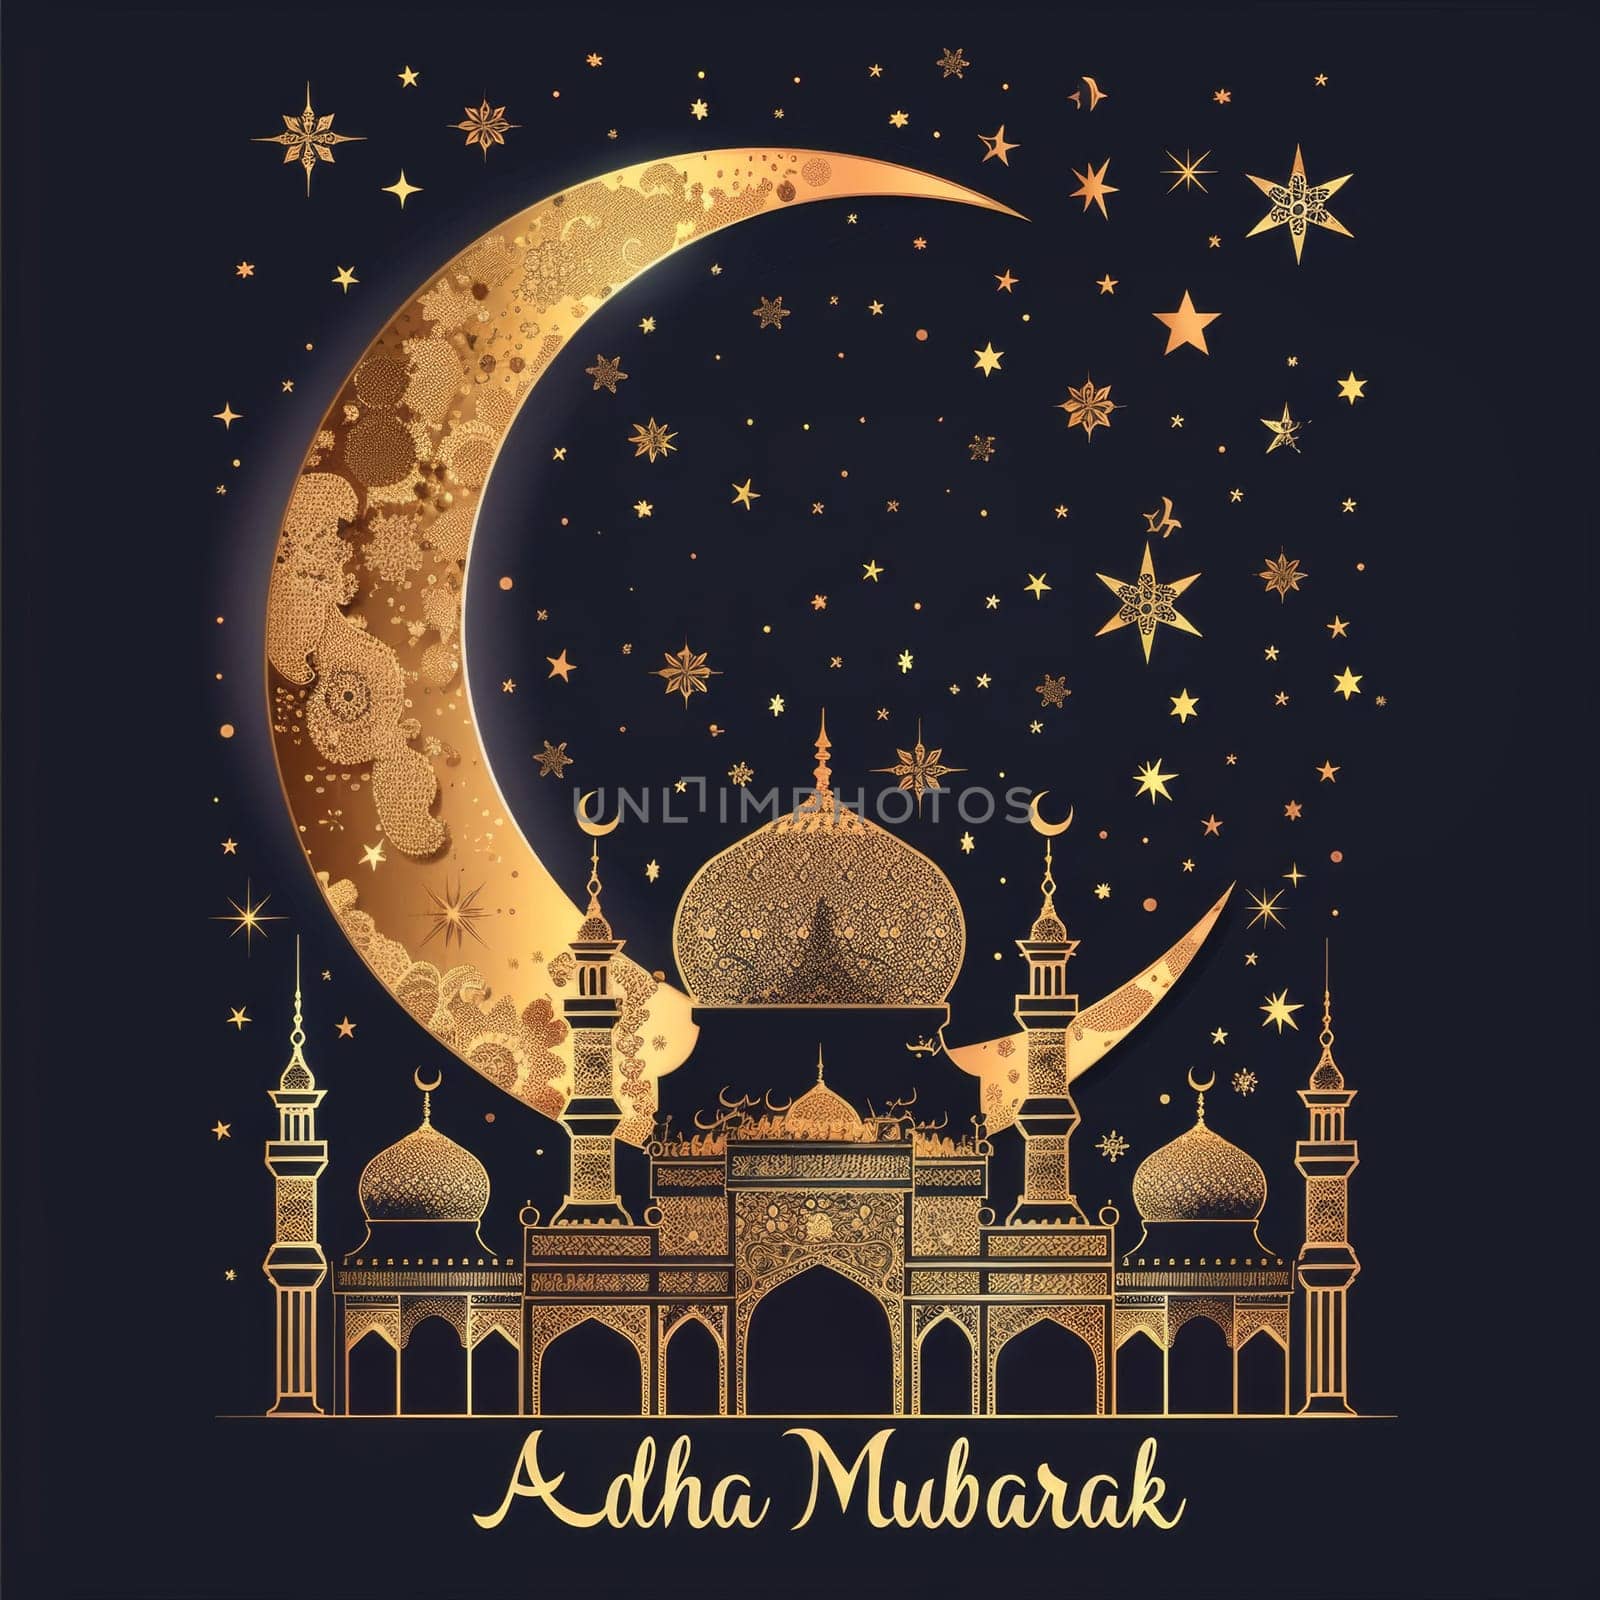 A captivating Eid Adha Mubarak greeting featuring an ornate crescent moon and stars over a silhouette of mosques. by sfinks